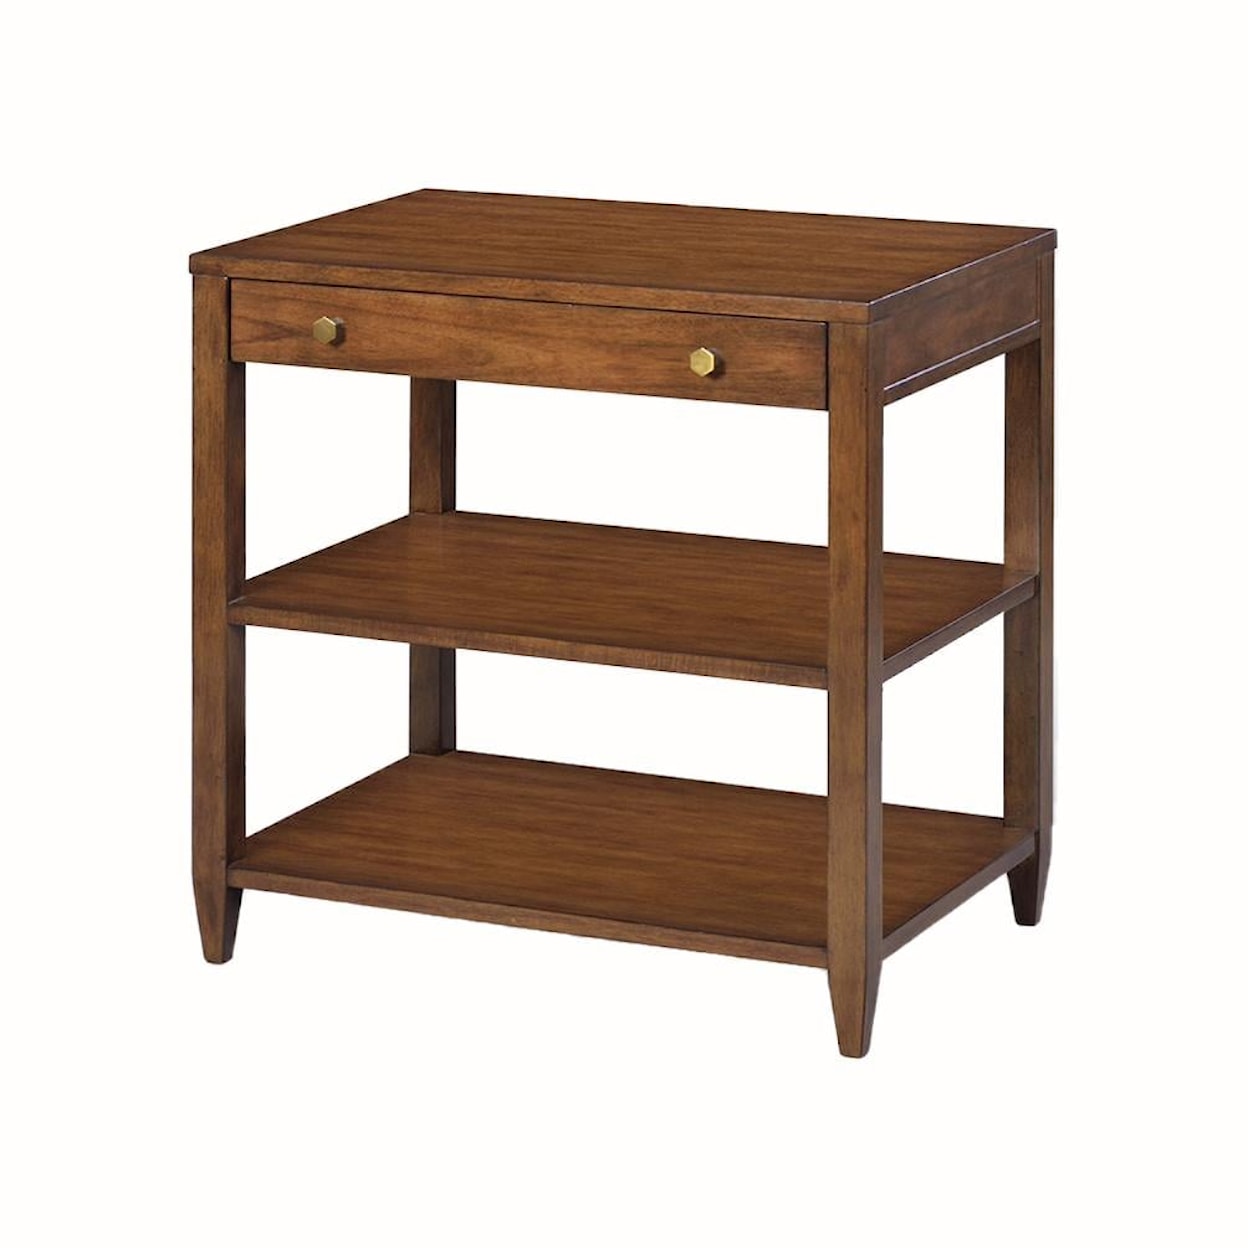 Oliver Home Furnishings End/ Side Tables WIDE, RECTANGLE SIDE TABLE- RUSTIC